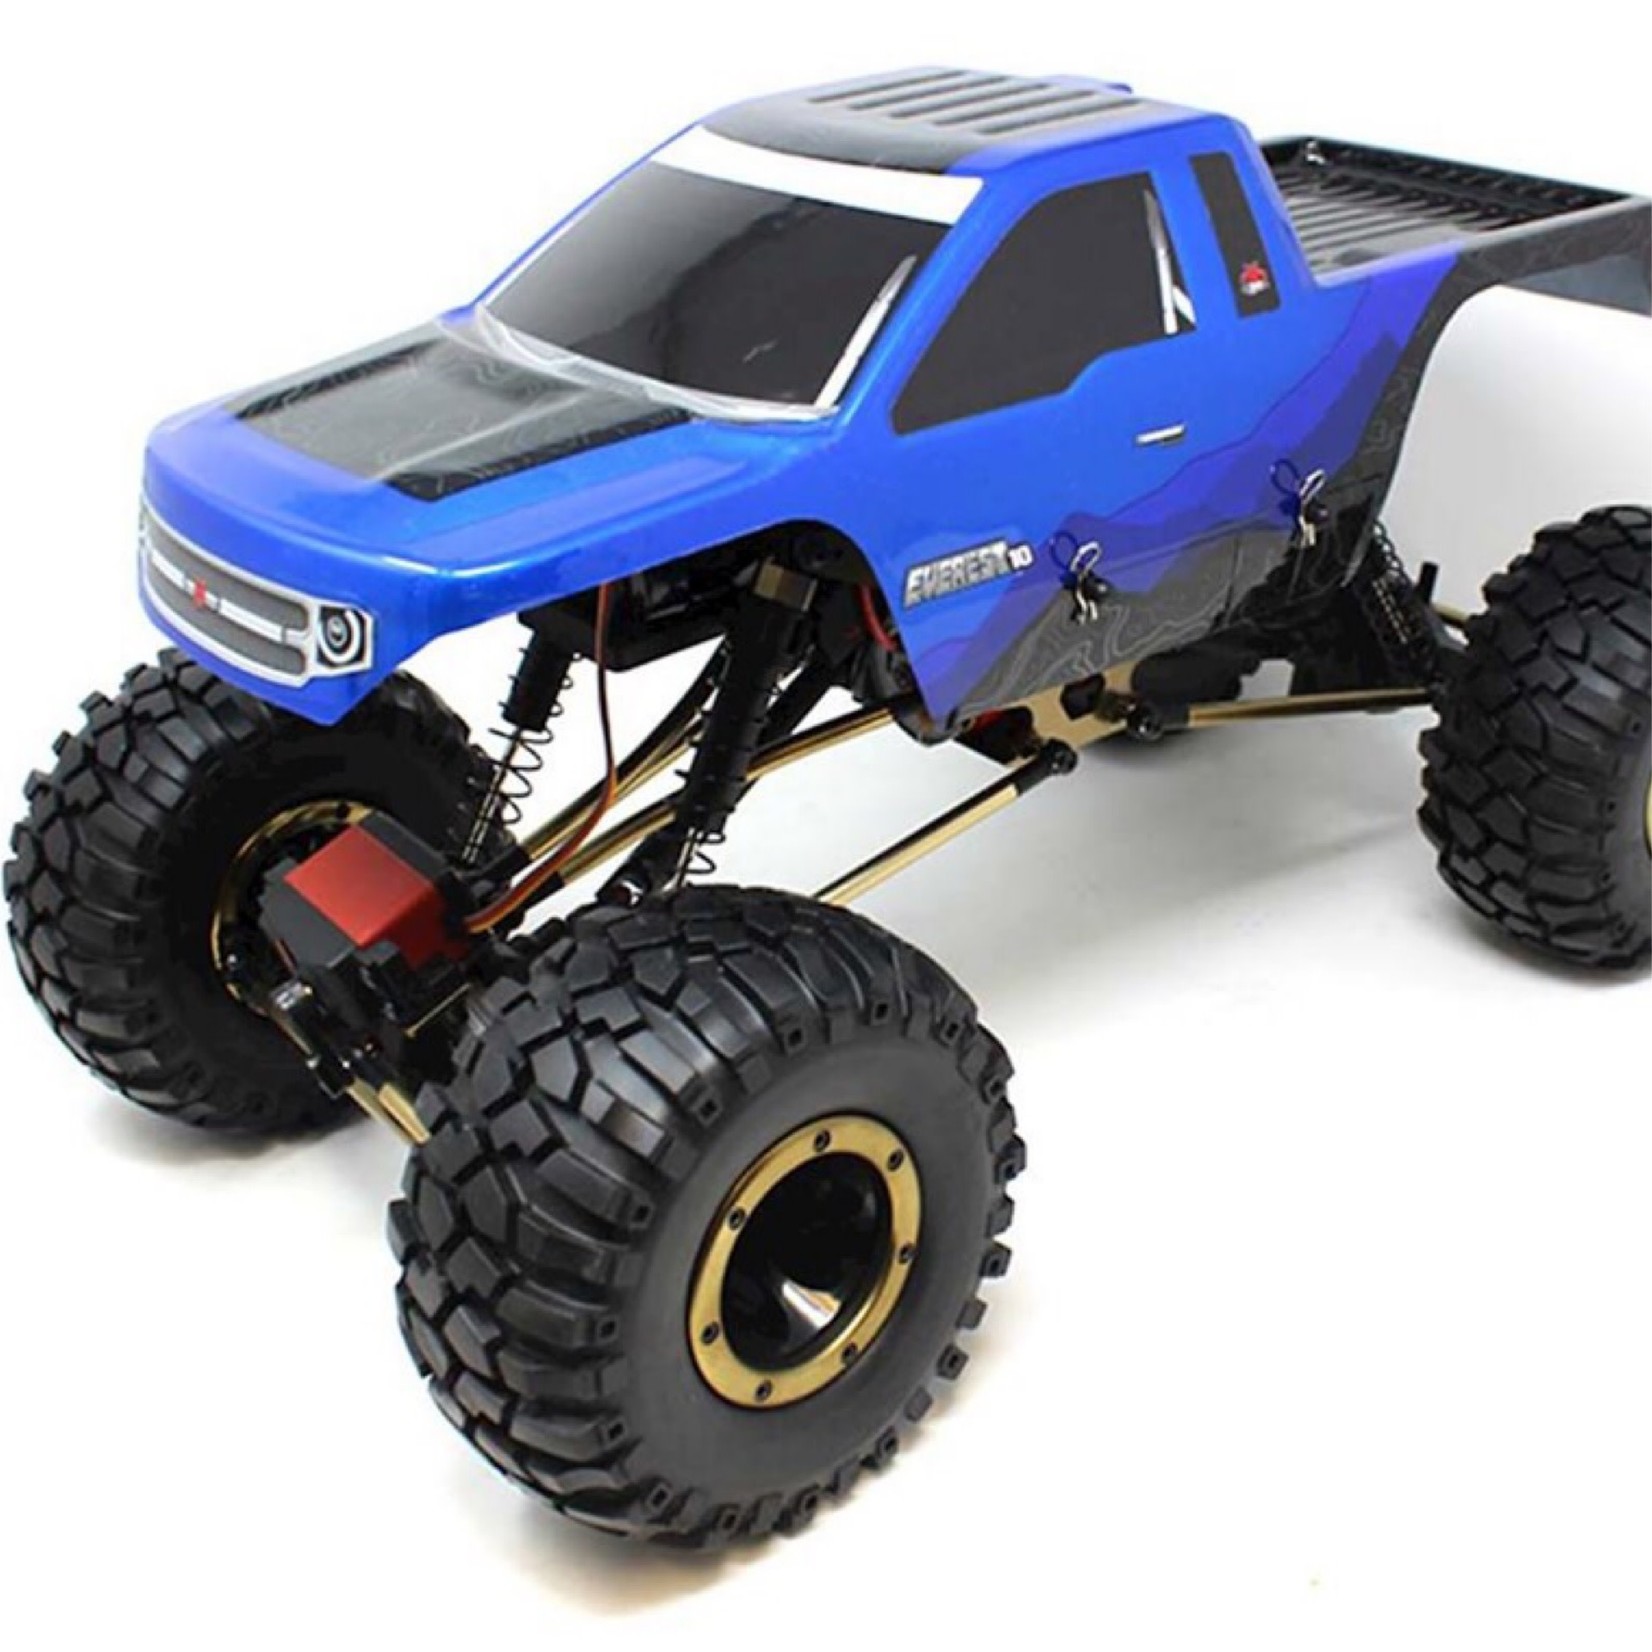 Redcat Racing Redcat Everest-10 1/10 4WD RTR Electric Rock Crawler w/2.4GHz Radio (Blue) #RER10682